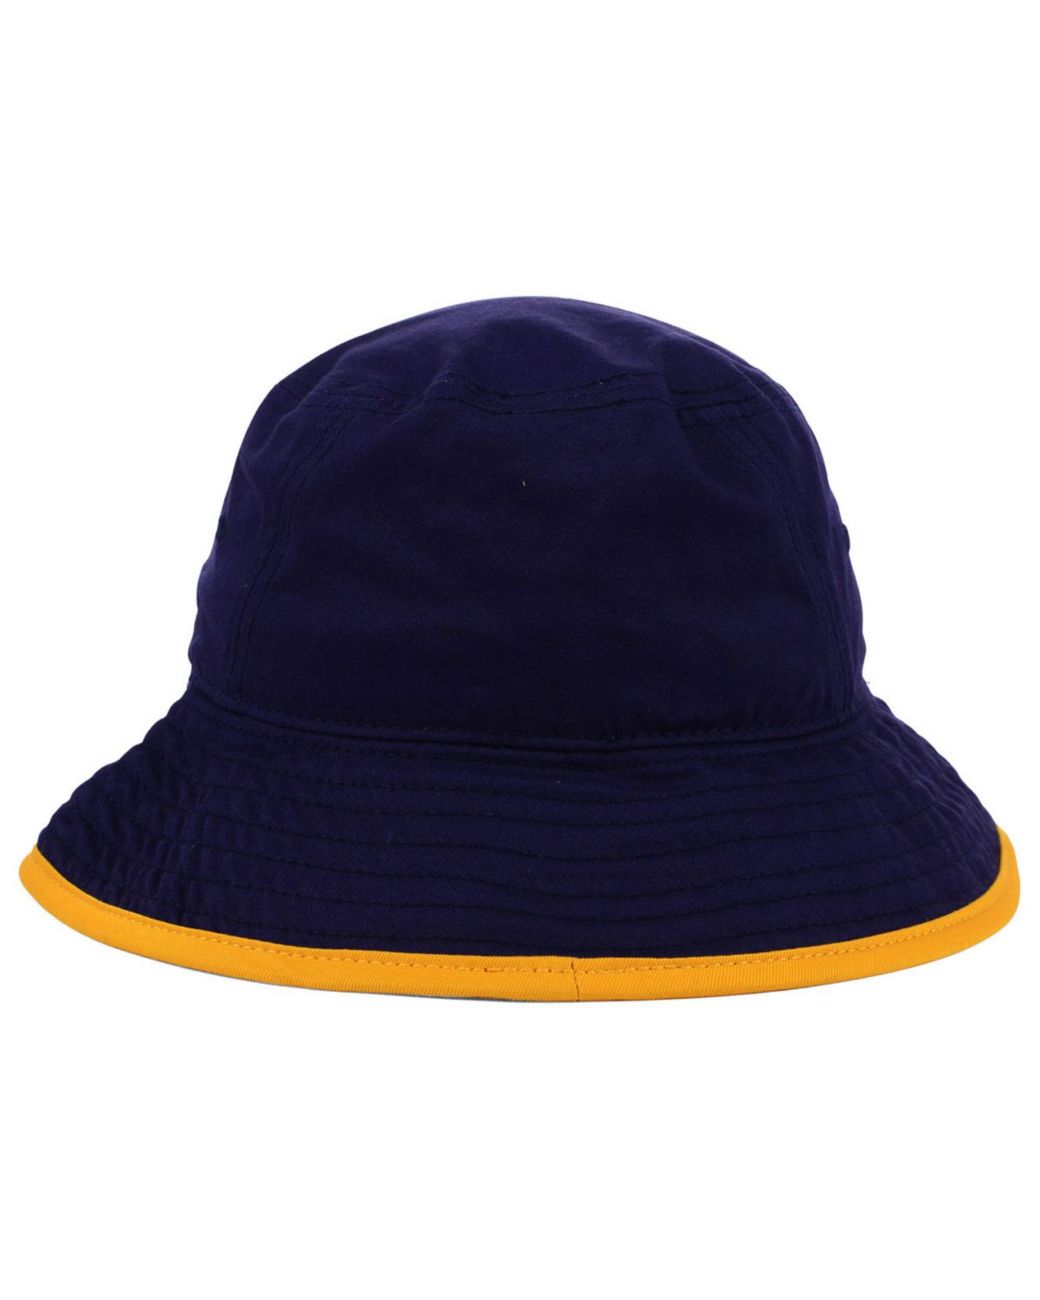 Buy Adult Bucket Hat St. Louis Blues NHL Reversible Cotton Online in India  